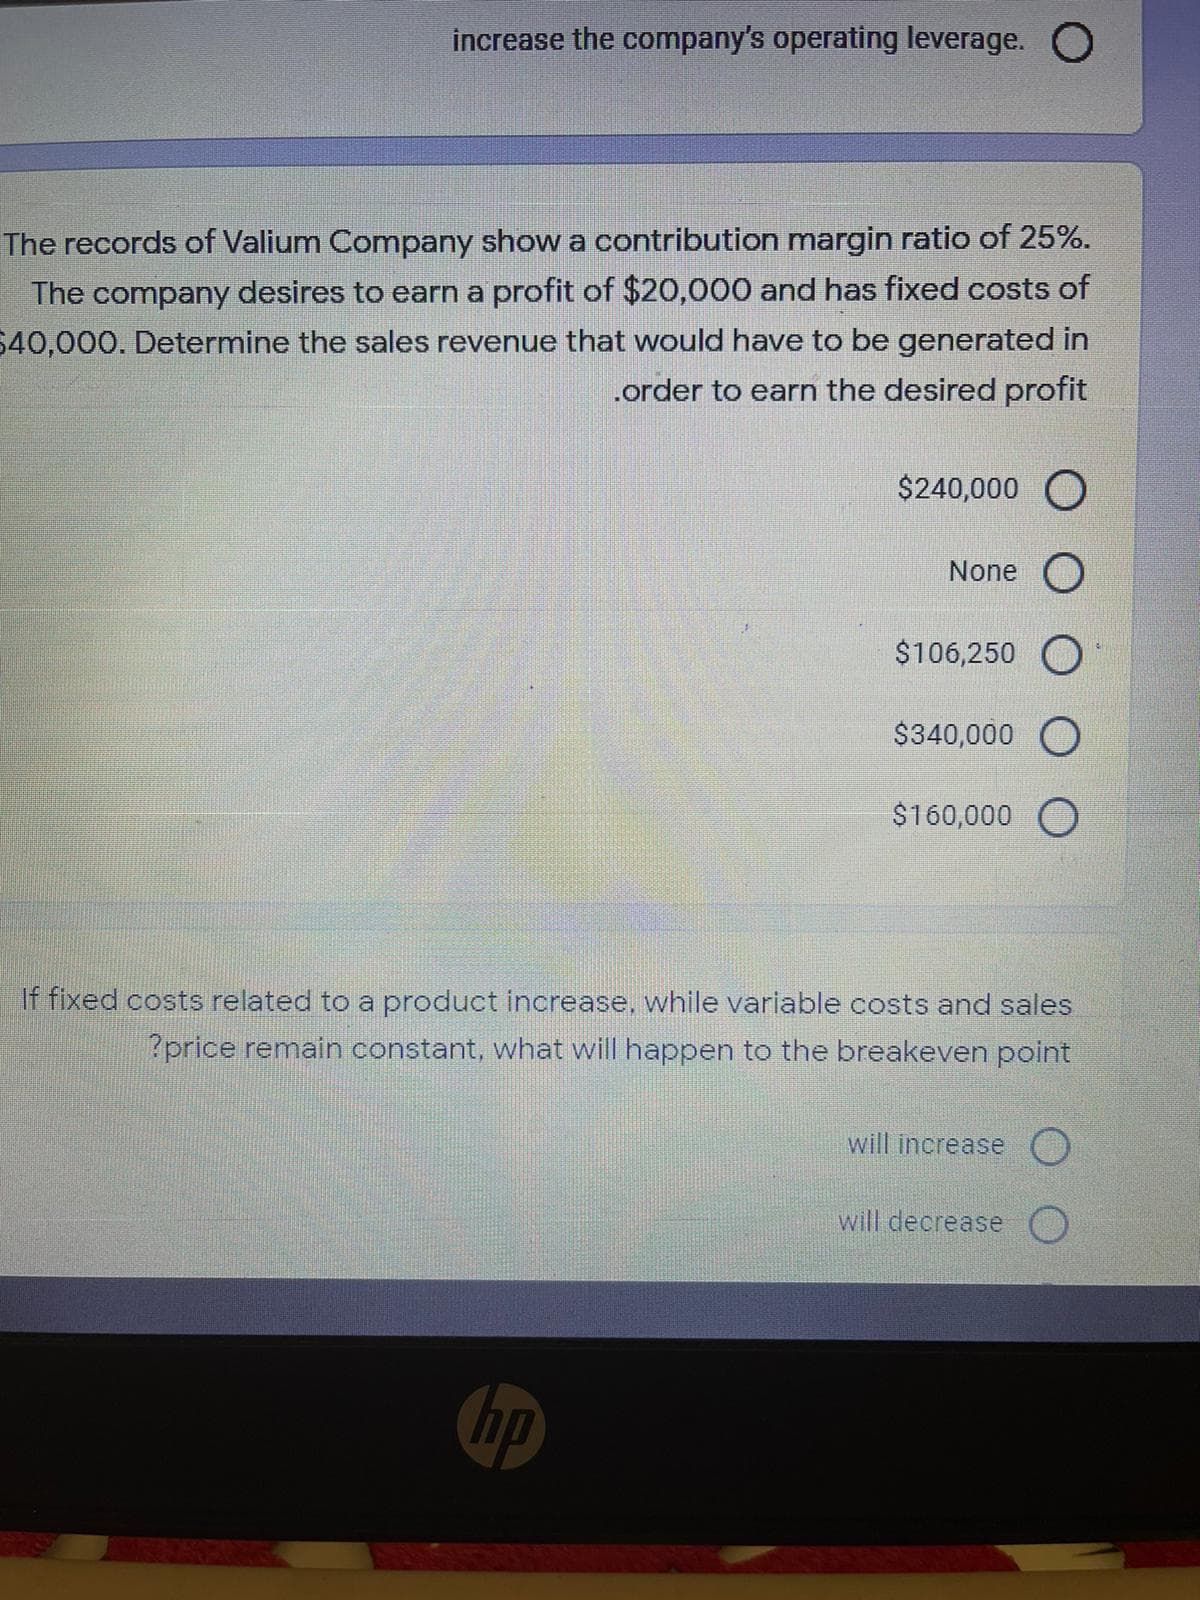 increase the company's operating leverage. O
The records of Valium Company show a contribution margin ratio of 25%.
The company desires to earn a profit of $20,000 and has fixed costs of
40,000. Determine the sales revenue that would have to be generated in
.order to earn the desired profit
$240,000 O
None
$106,250 O
$340,000 O
$160,000 O
If fixed costs related to a product increase, while variable costs and sales
?price remain constant, what will happen to the breakeven point
will increase ()
will decrease
ho
